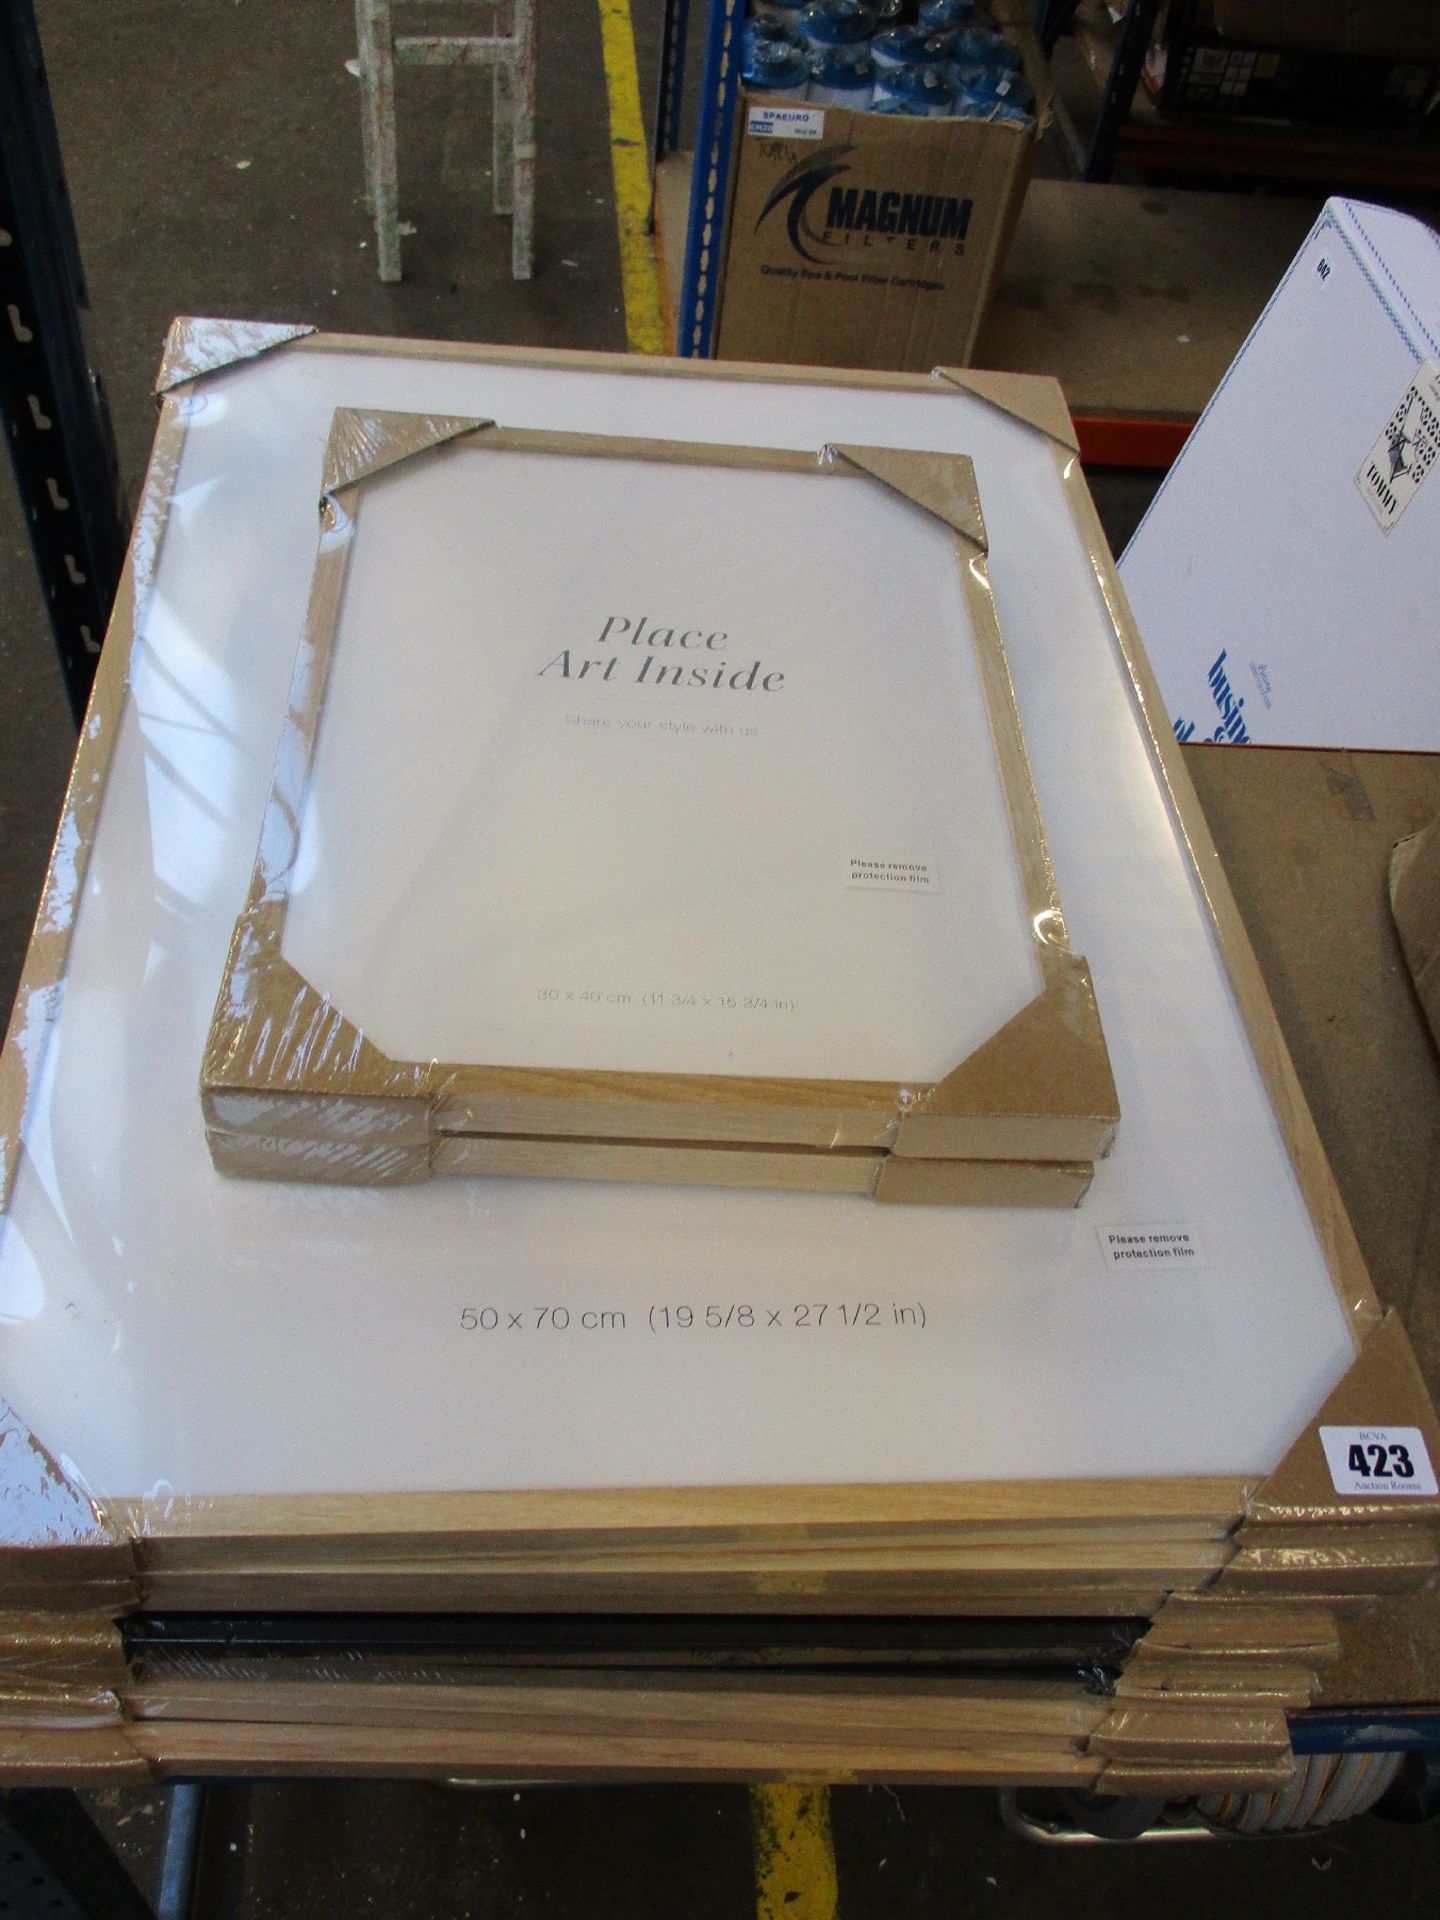 Seven as new Desenio 50 x 70 cm Picture Frames and two as new Desenio 30 x 40 cm Picture Frames.